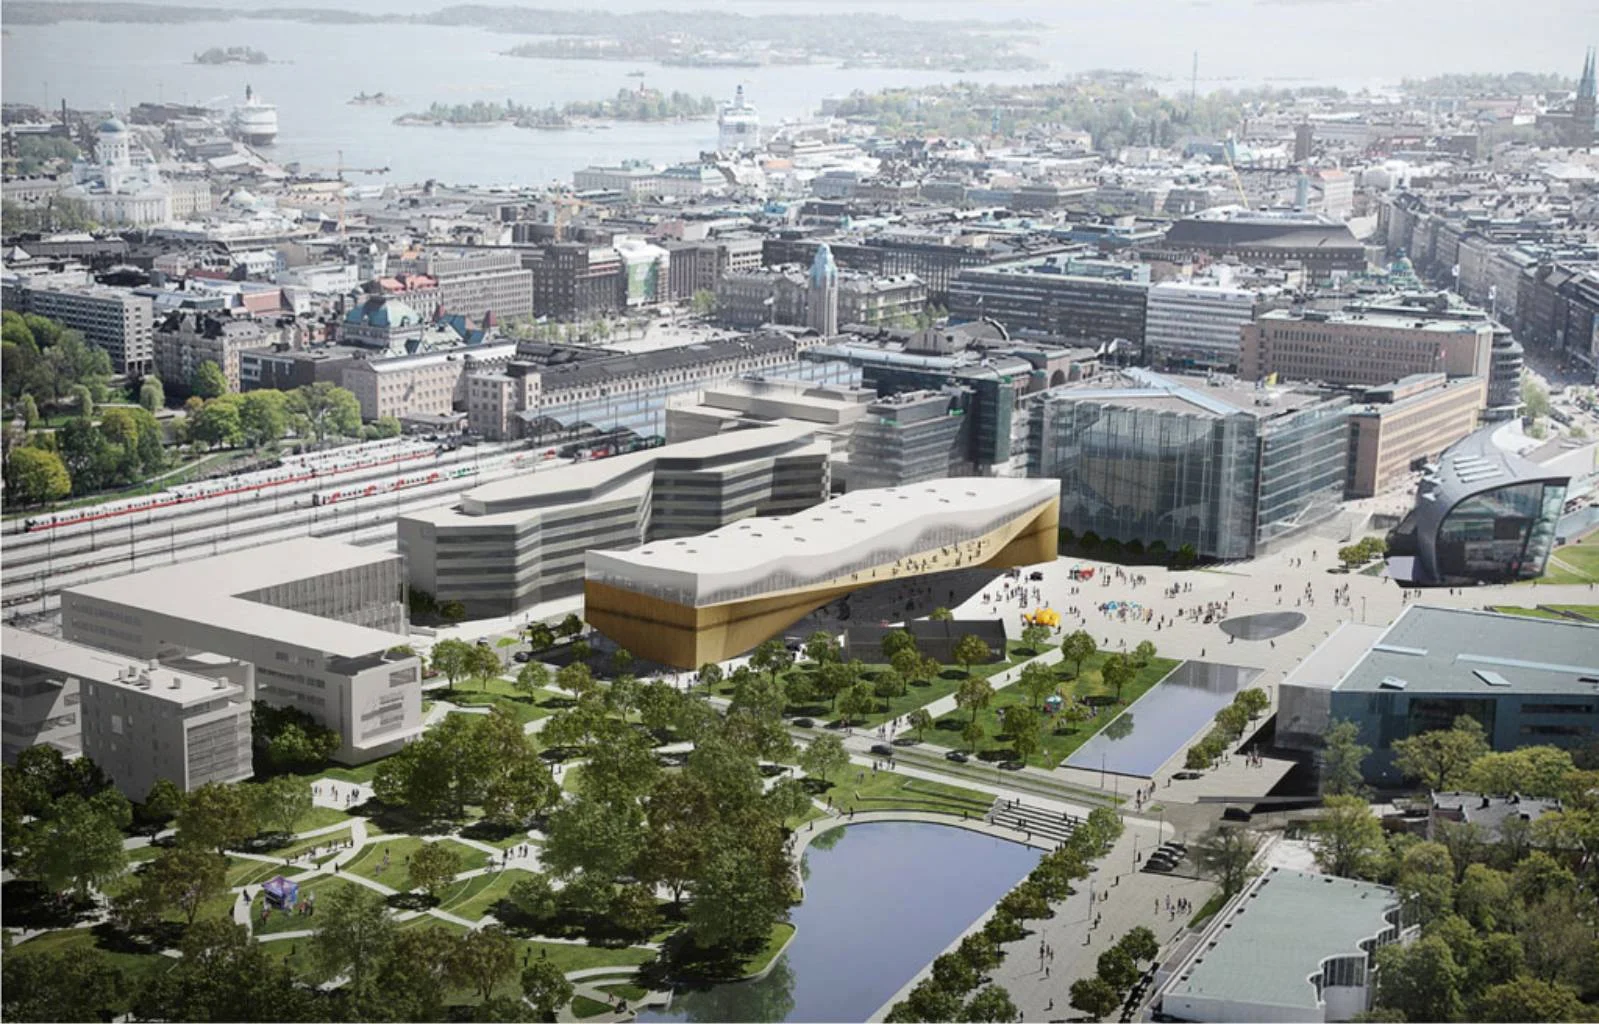 Ala wins Helsinki Central Library competition